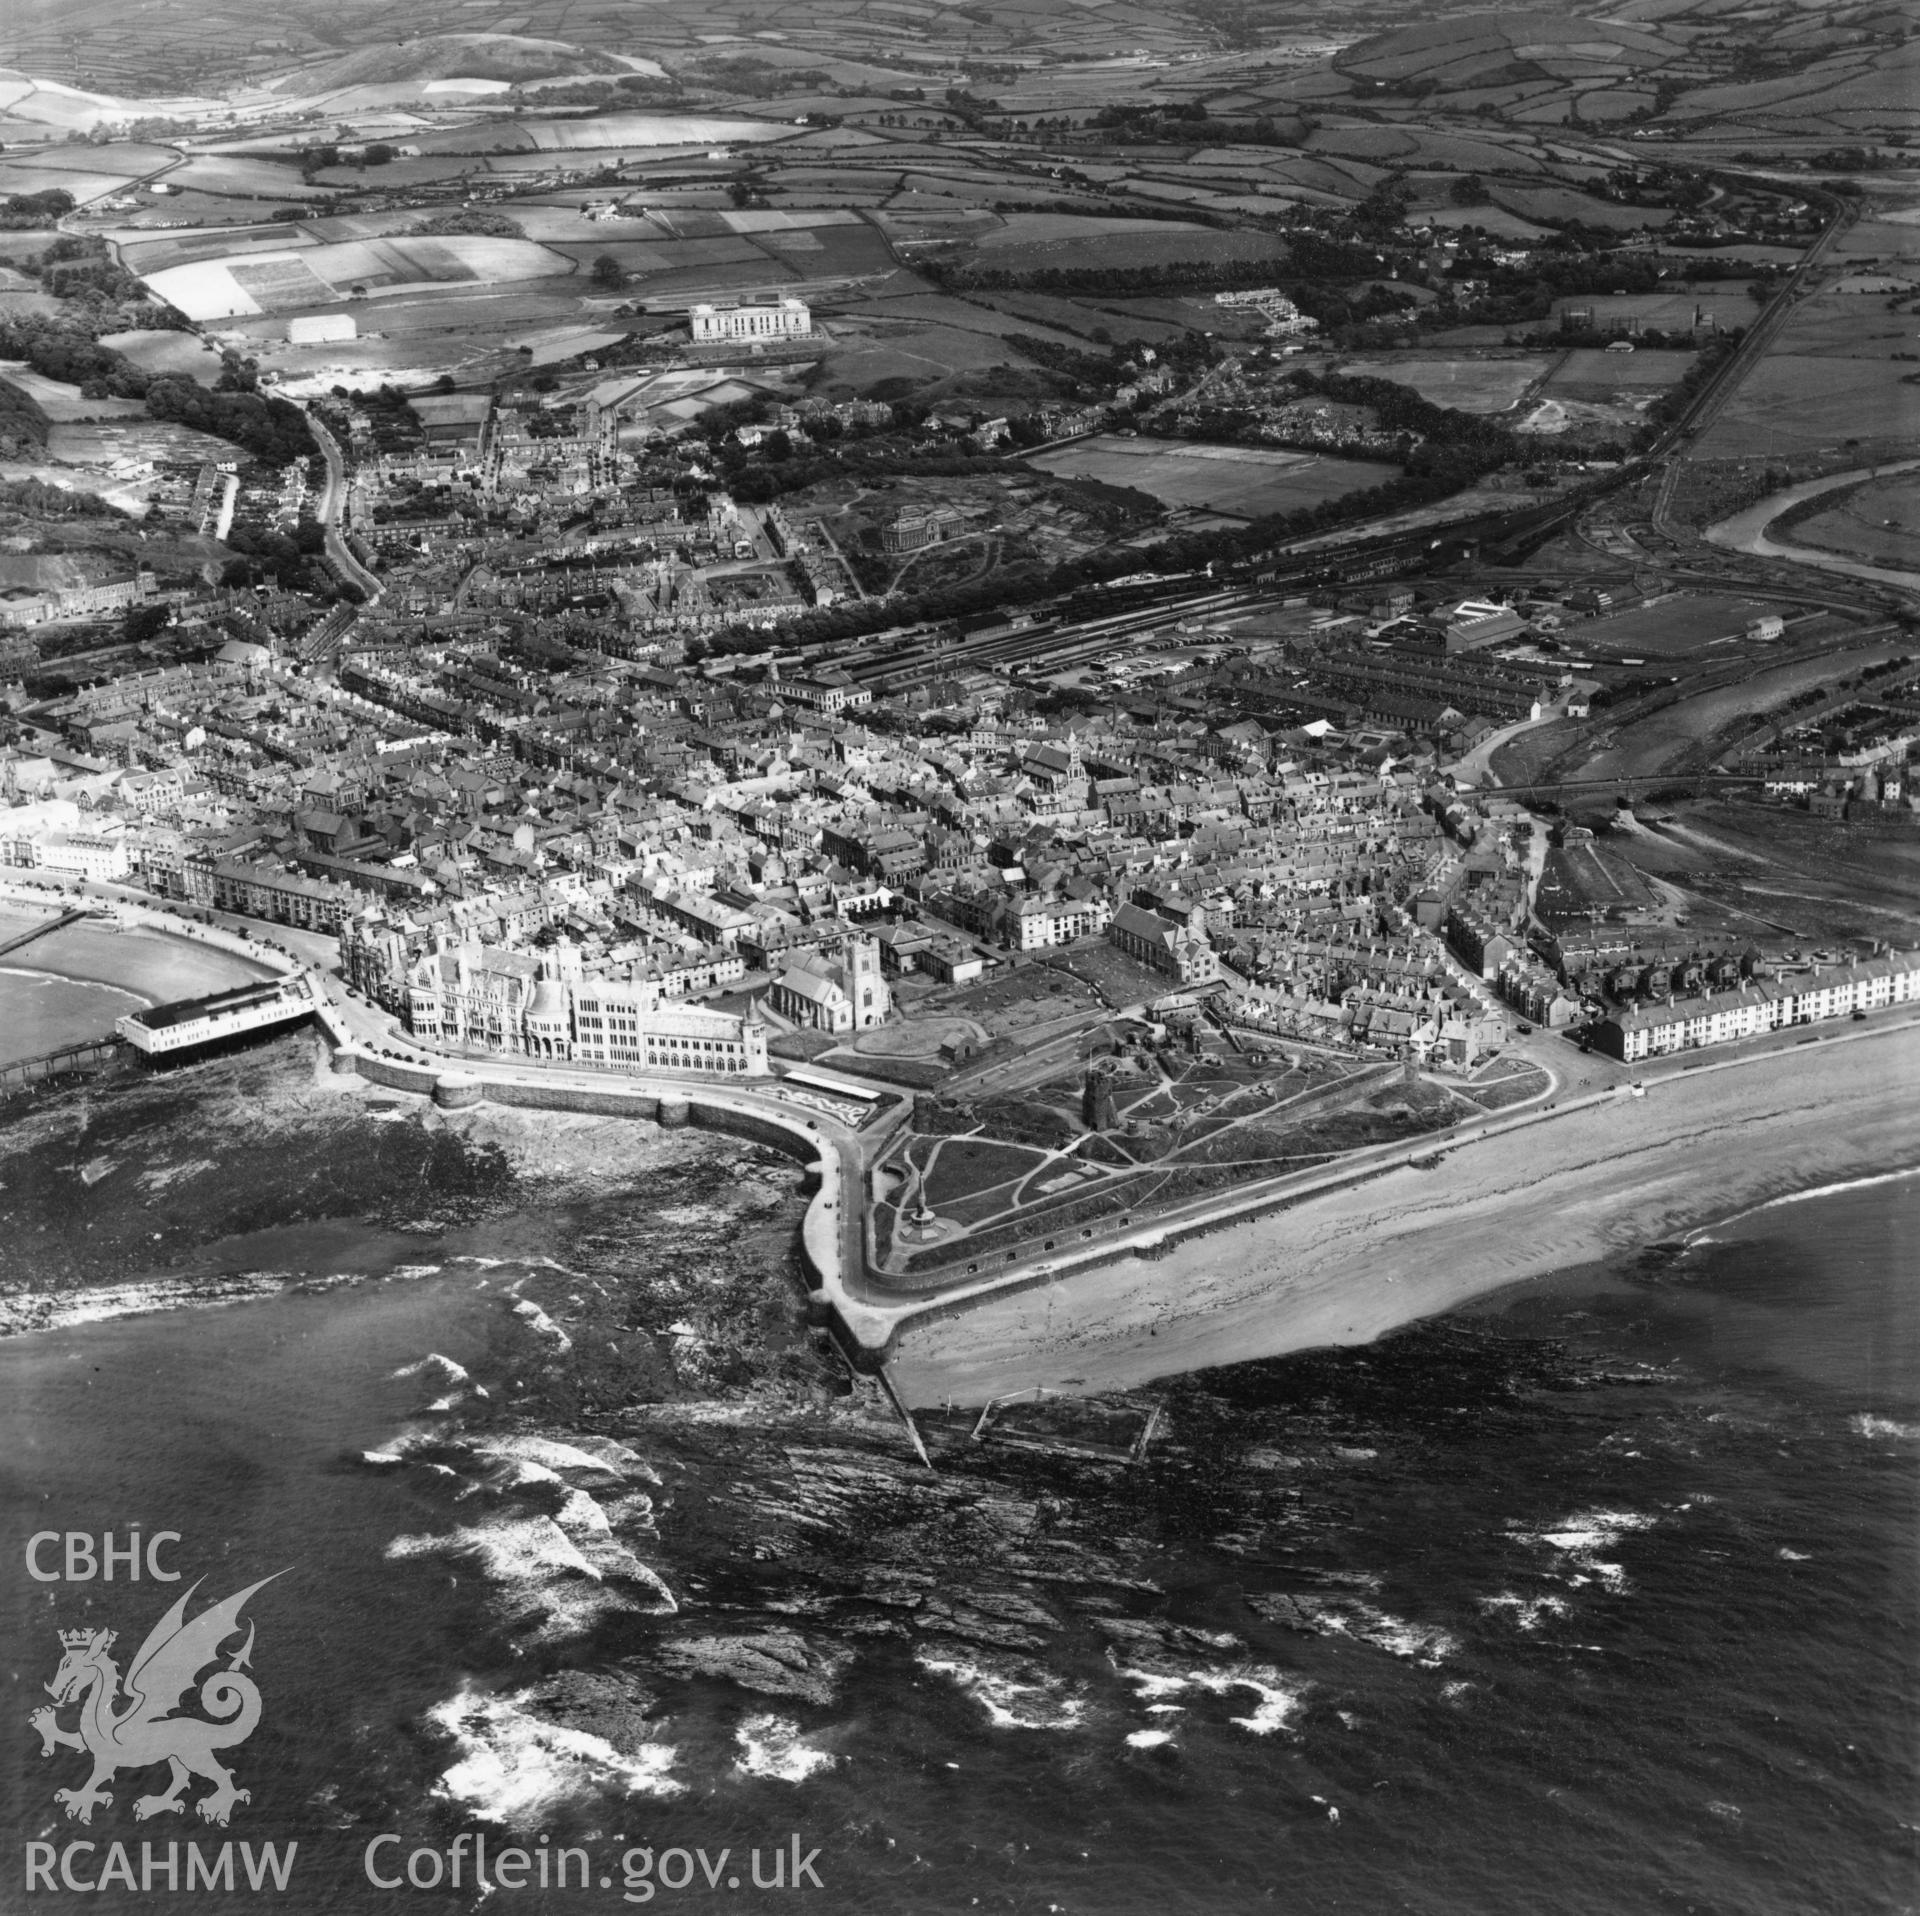 General view of Aberystwyth from the seafront looking north east, showing castle, pier and National Library of Wales. Oblique aerial photograph, 5?" cut roll film.